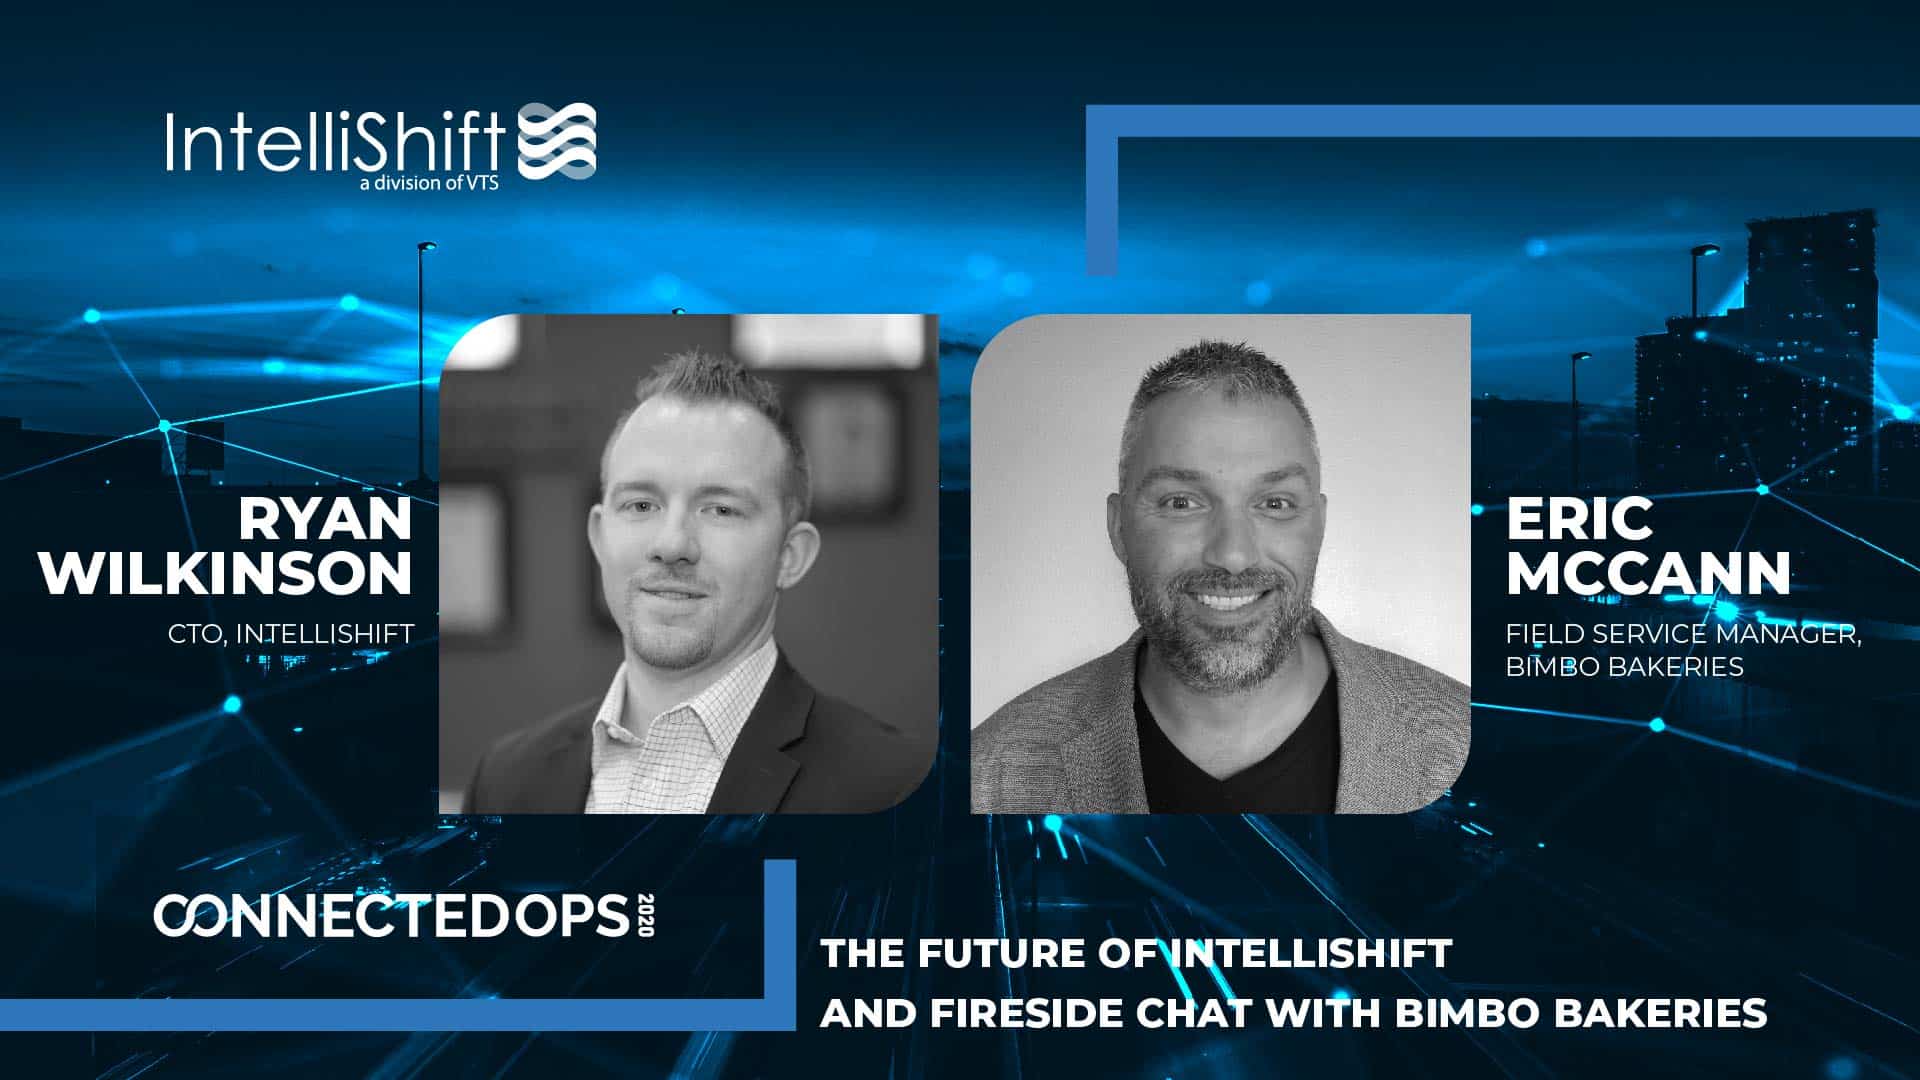 Product Keynote: The Future of IntelliShift and Fireside Chat with Bimbo Bakeries